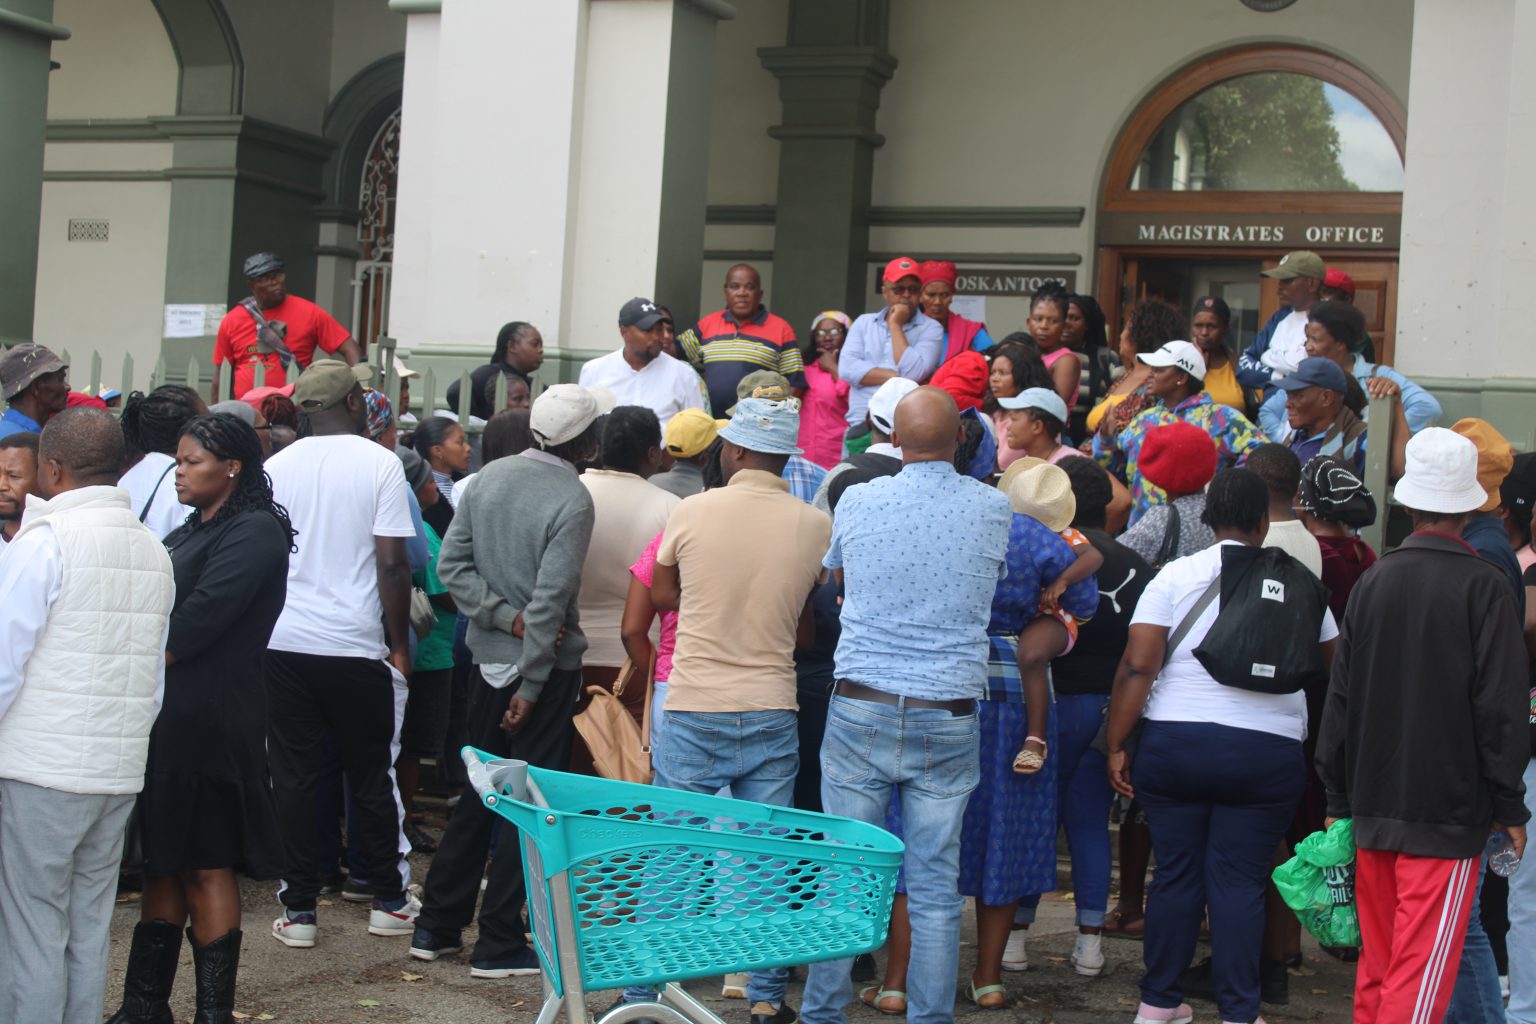 Family members and supporters of former Makana ward councillor Luyanda Sakata and three other men, discuss the murder case outside the Grahamstown Magistrate's Court on Wednesday. Photo: Luvuyo Mjekula